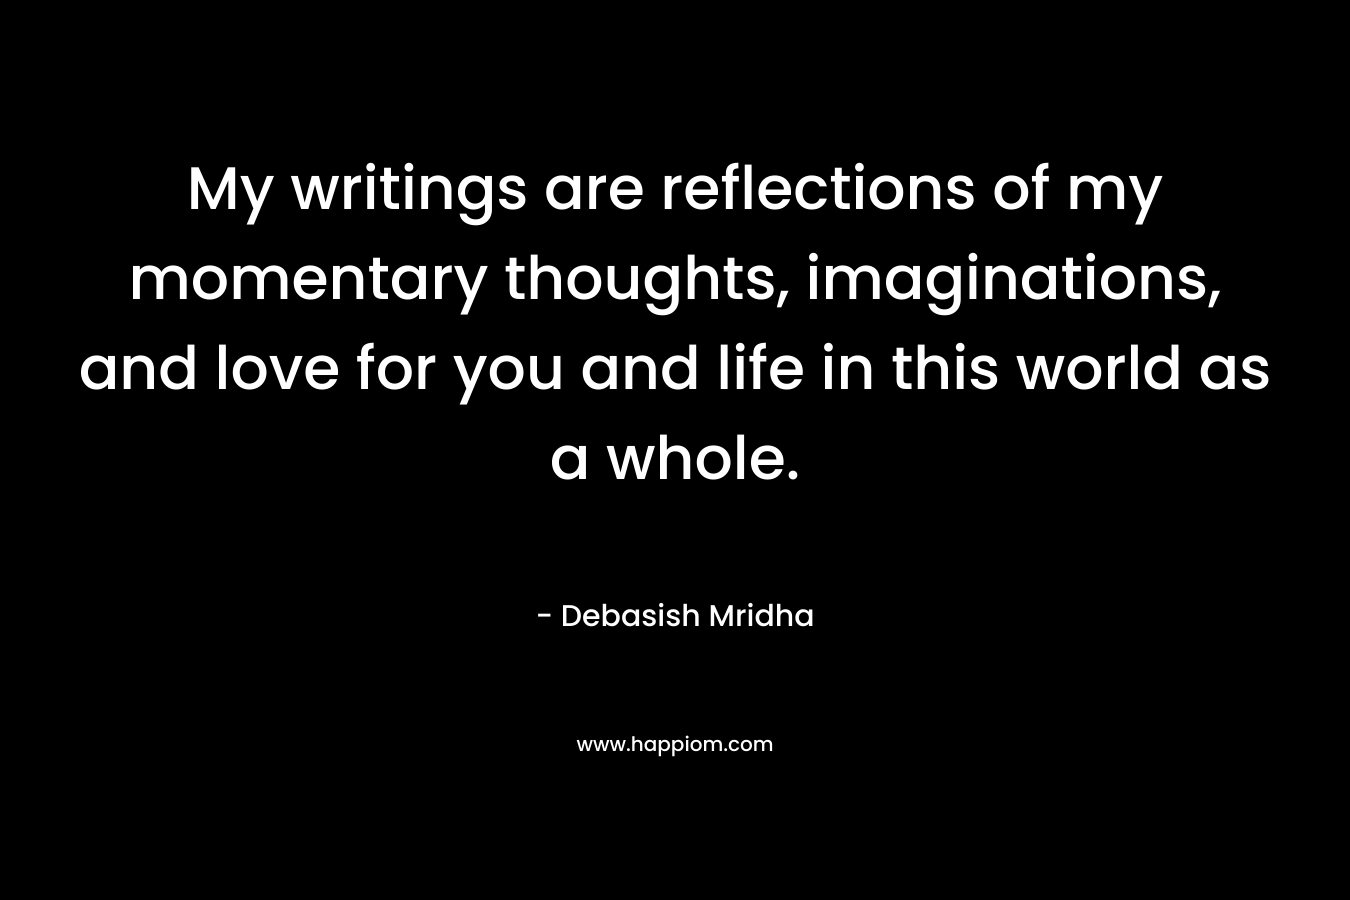 My writings are reflections of my momentary thoughts, imaginations, and love for you and life in this world as a whole.